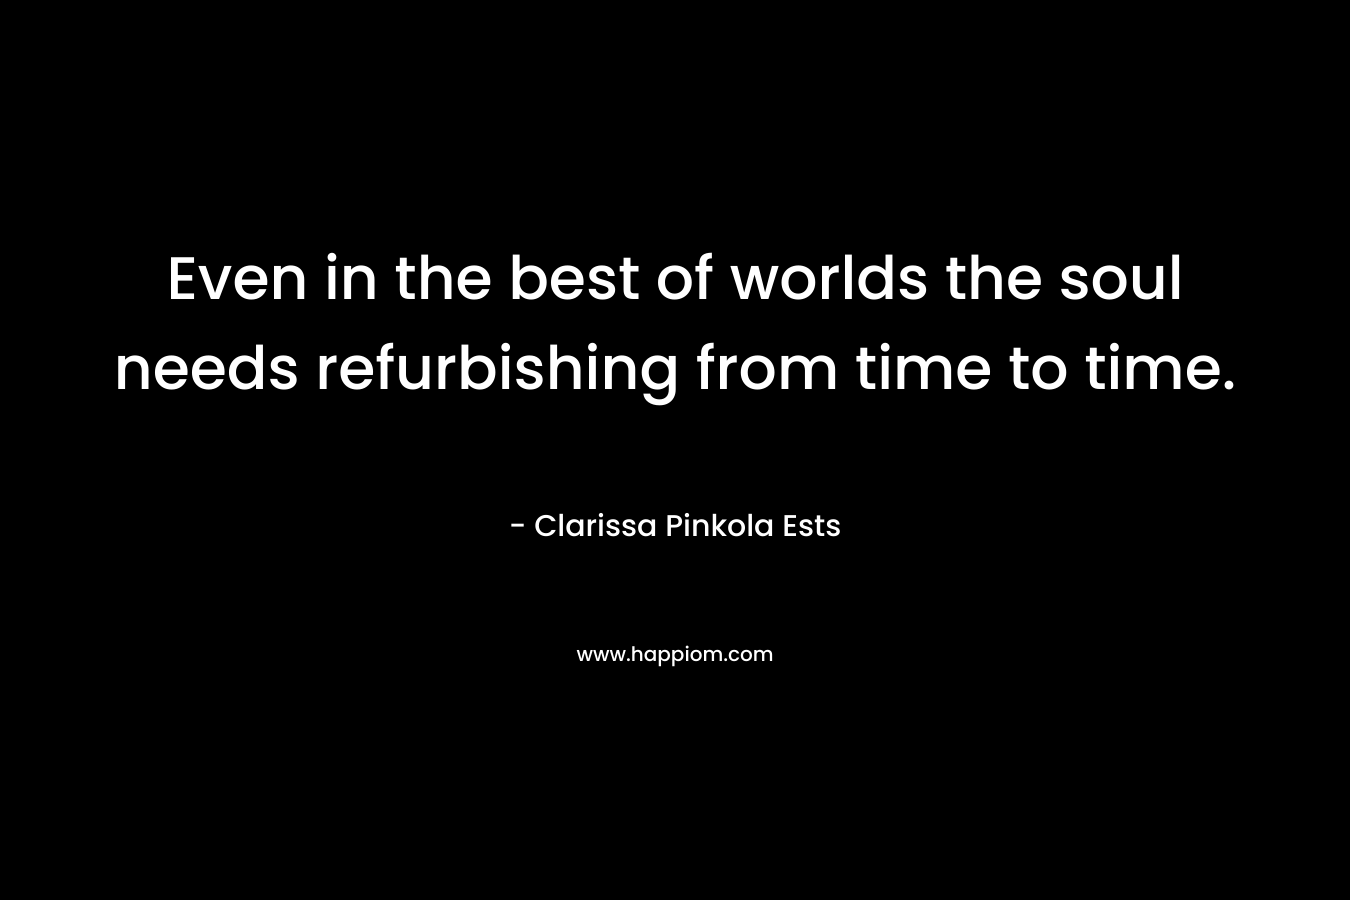 Even in the best of worlds the soul needs refurbishing from time to time. – Clarissa Pinkola Ests